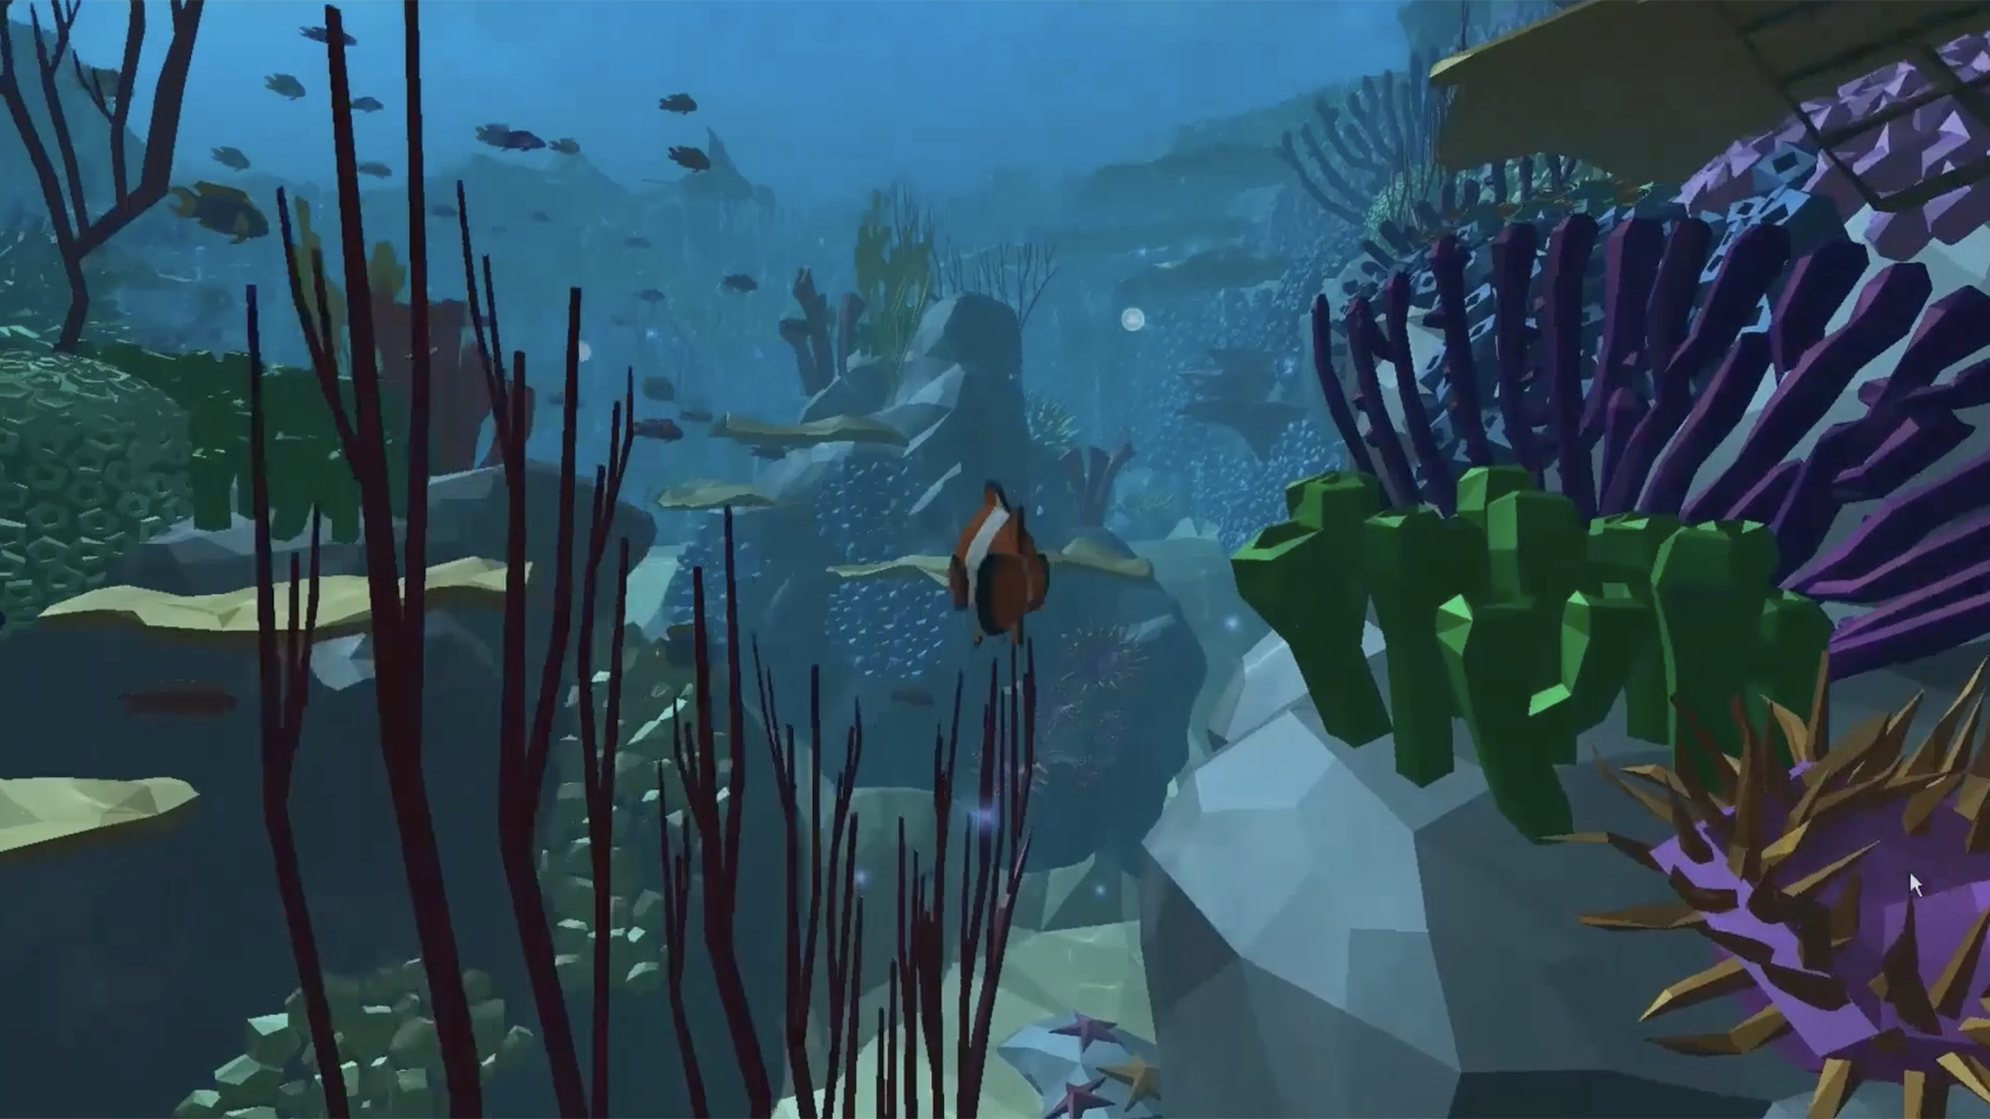 An animated underwater scene as part of a virtual reality experience.